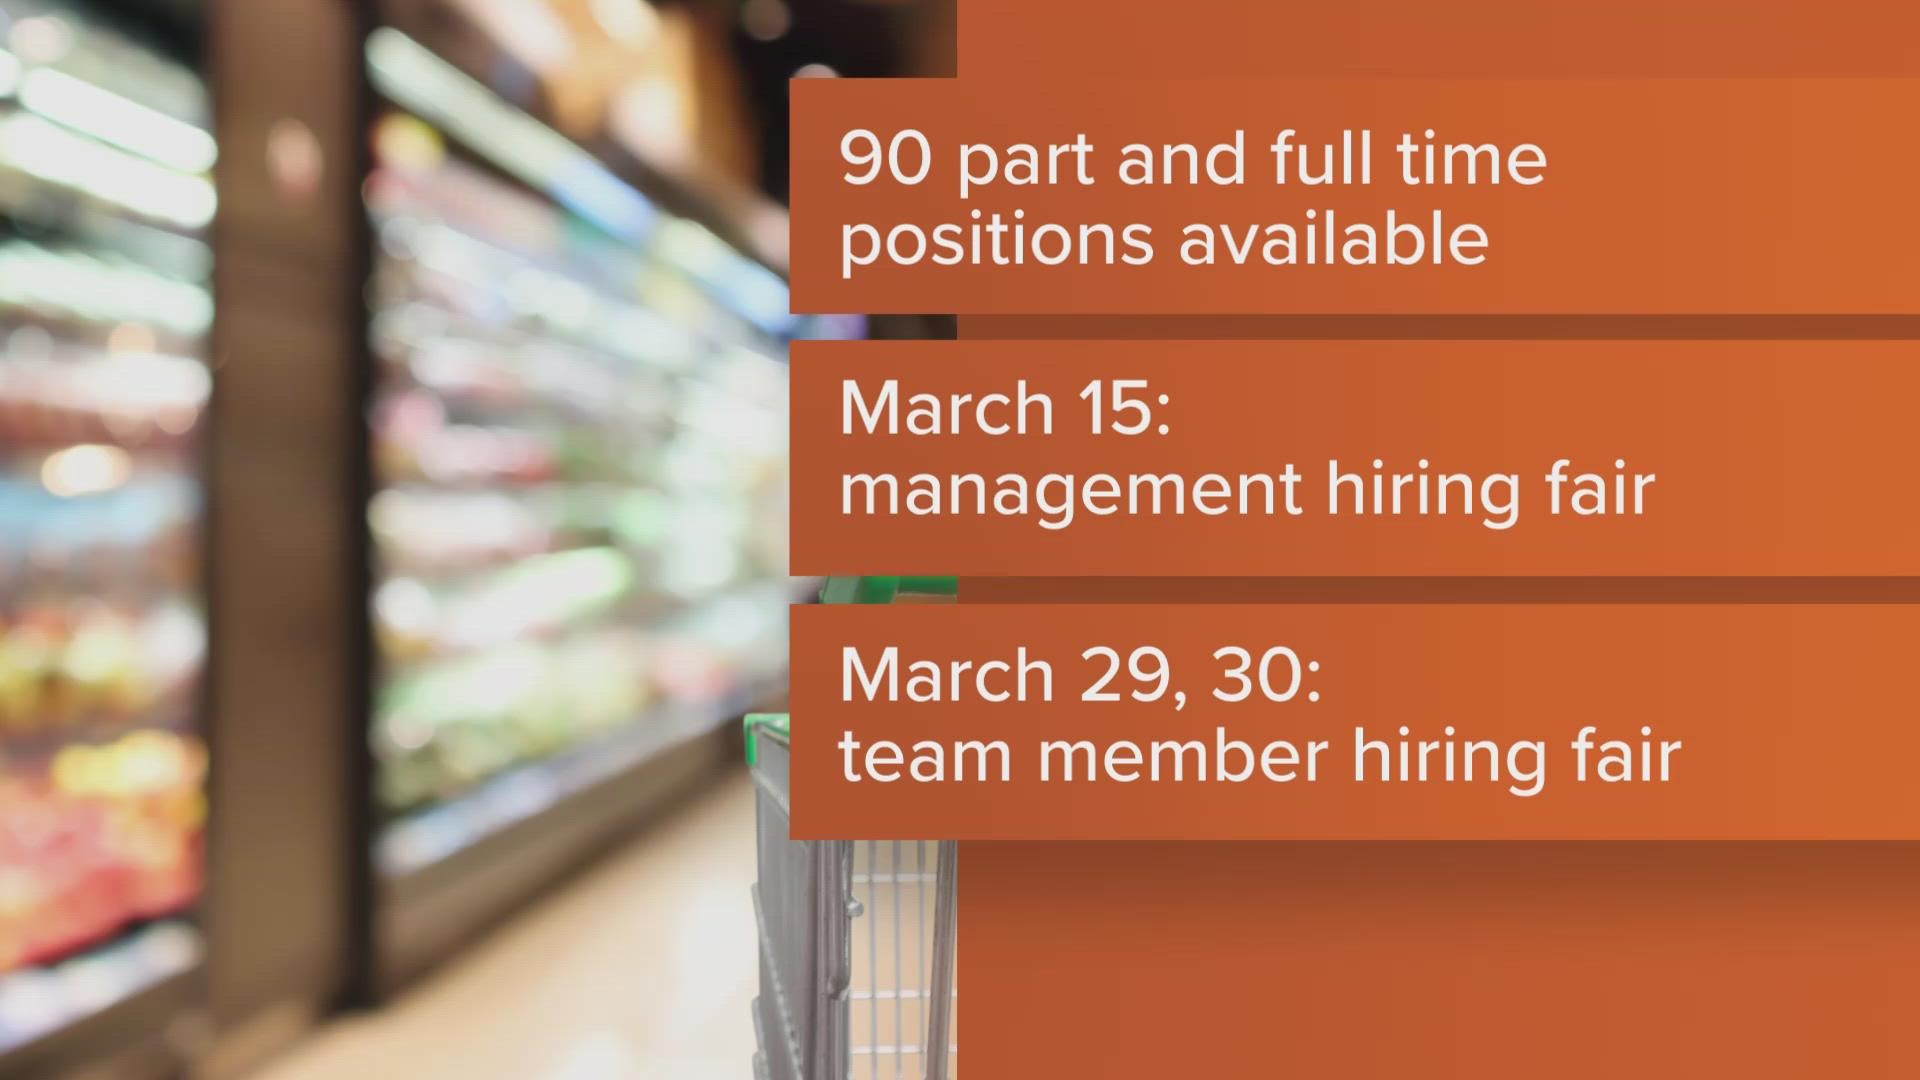 Sprouts Farmers Market will hire 90 new employees to staff its grocery store location opening in Manassas, Virginia.